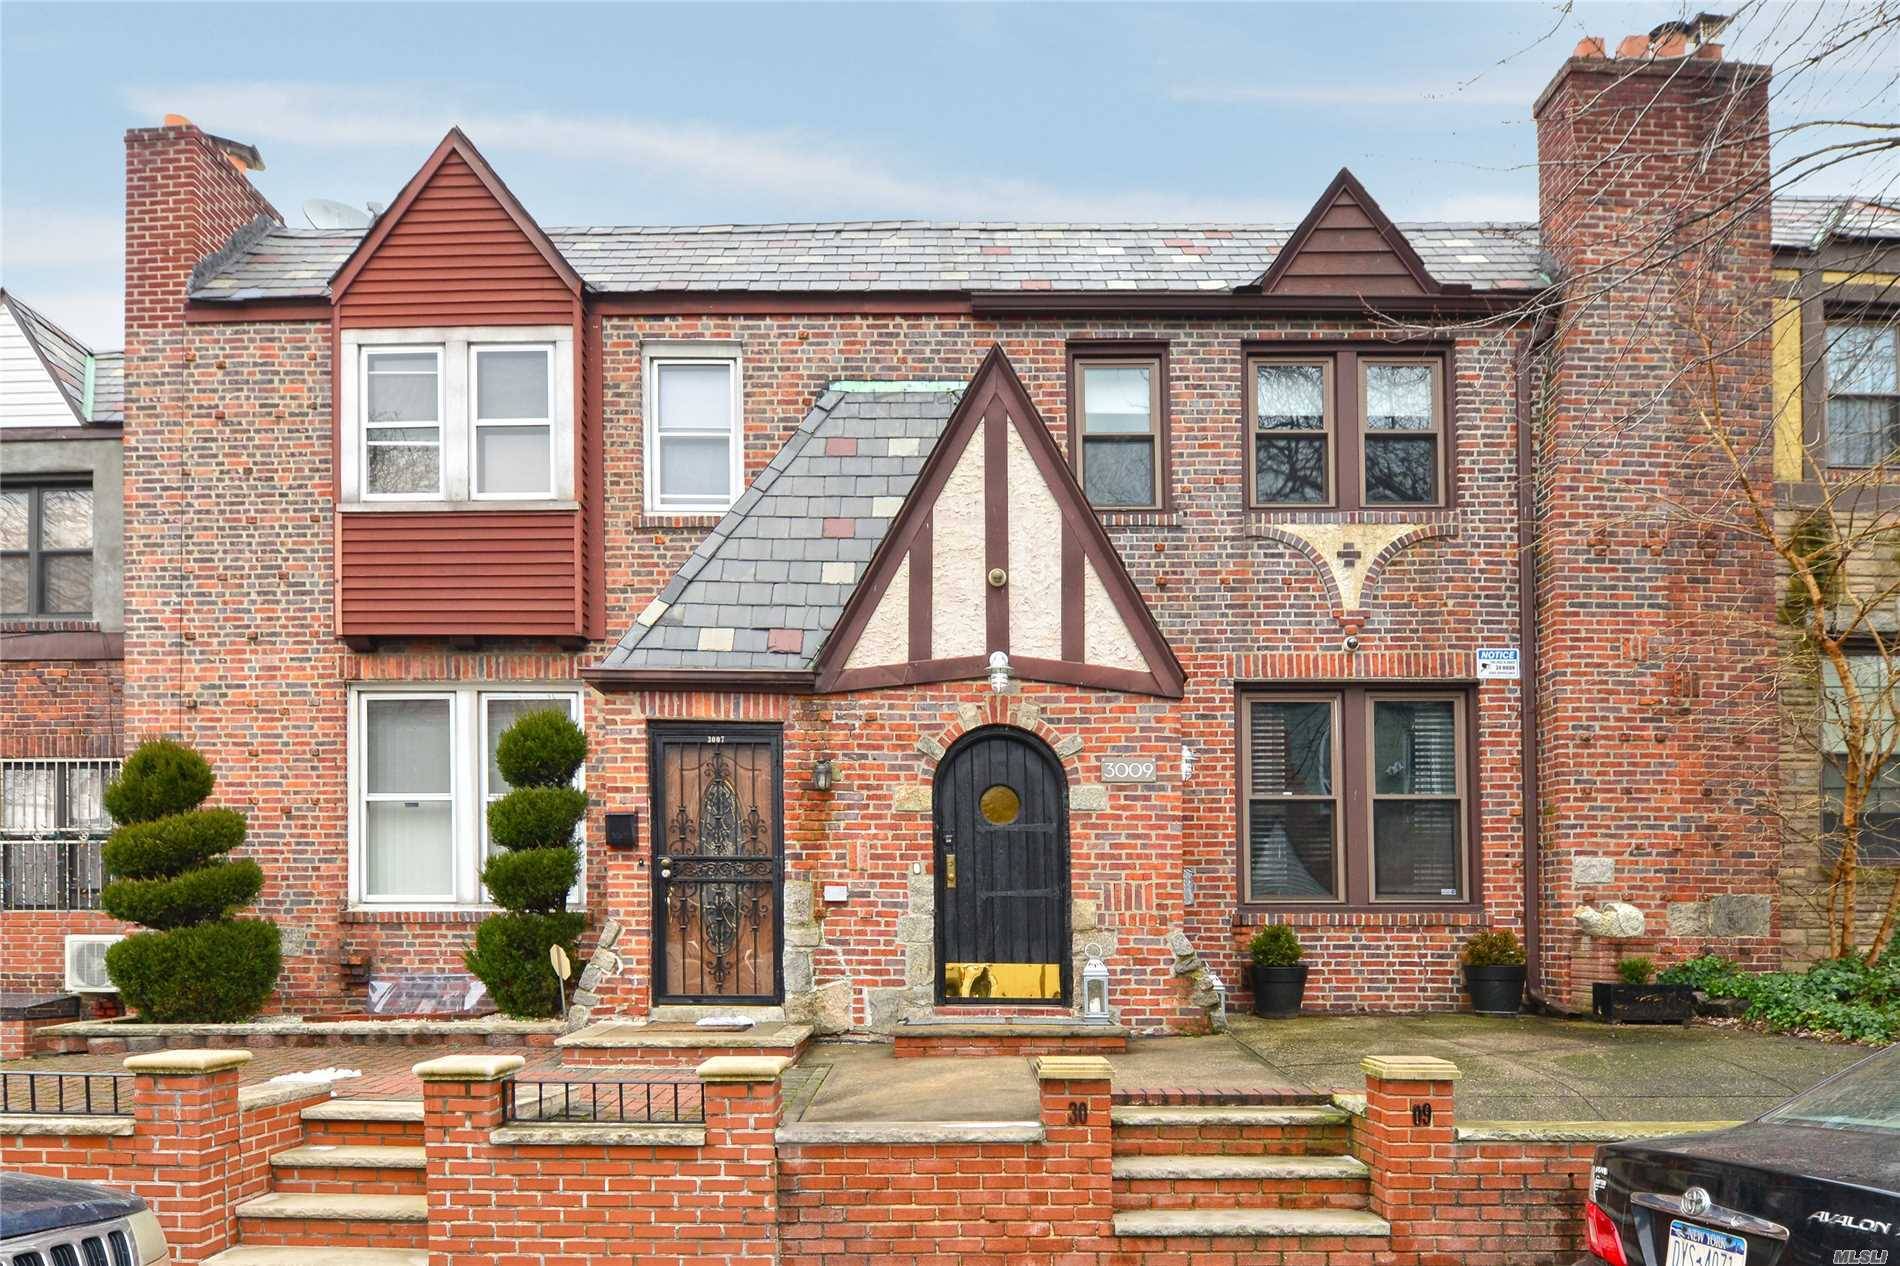 Just Arrived- Charming And Well Maintained Tudor Style Hone On A Great Block.